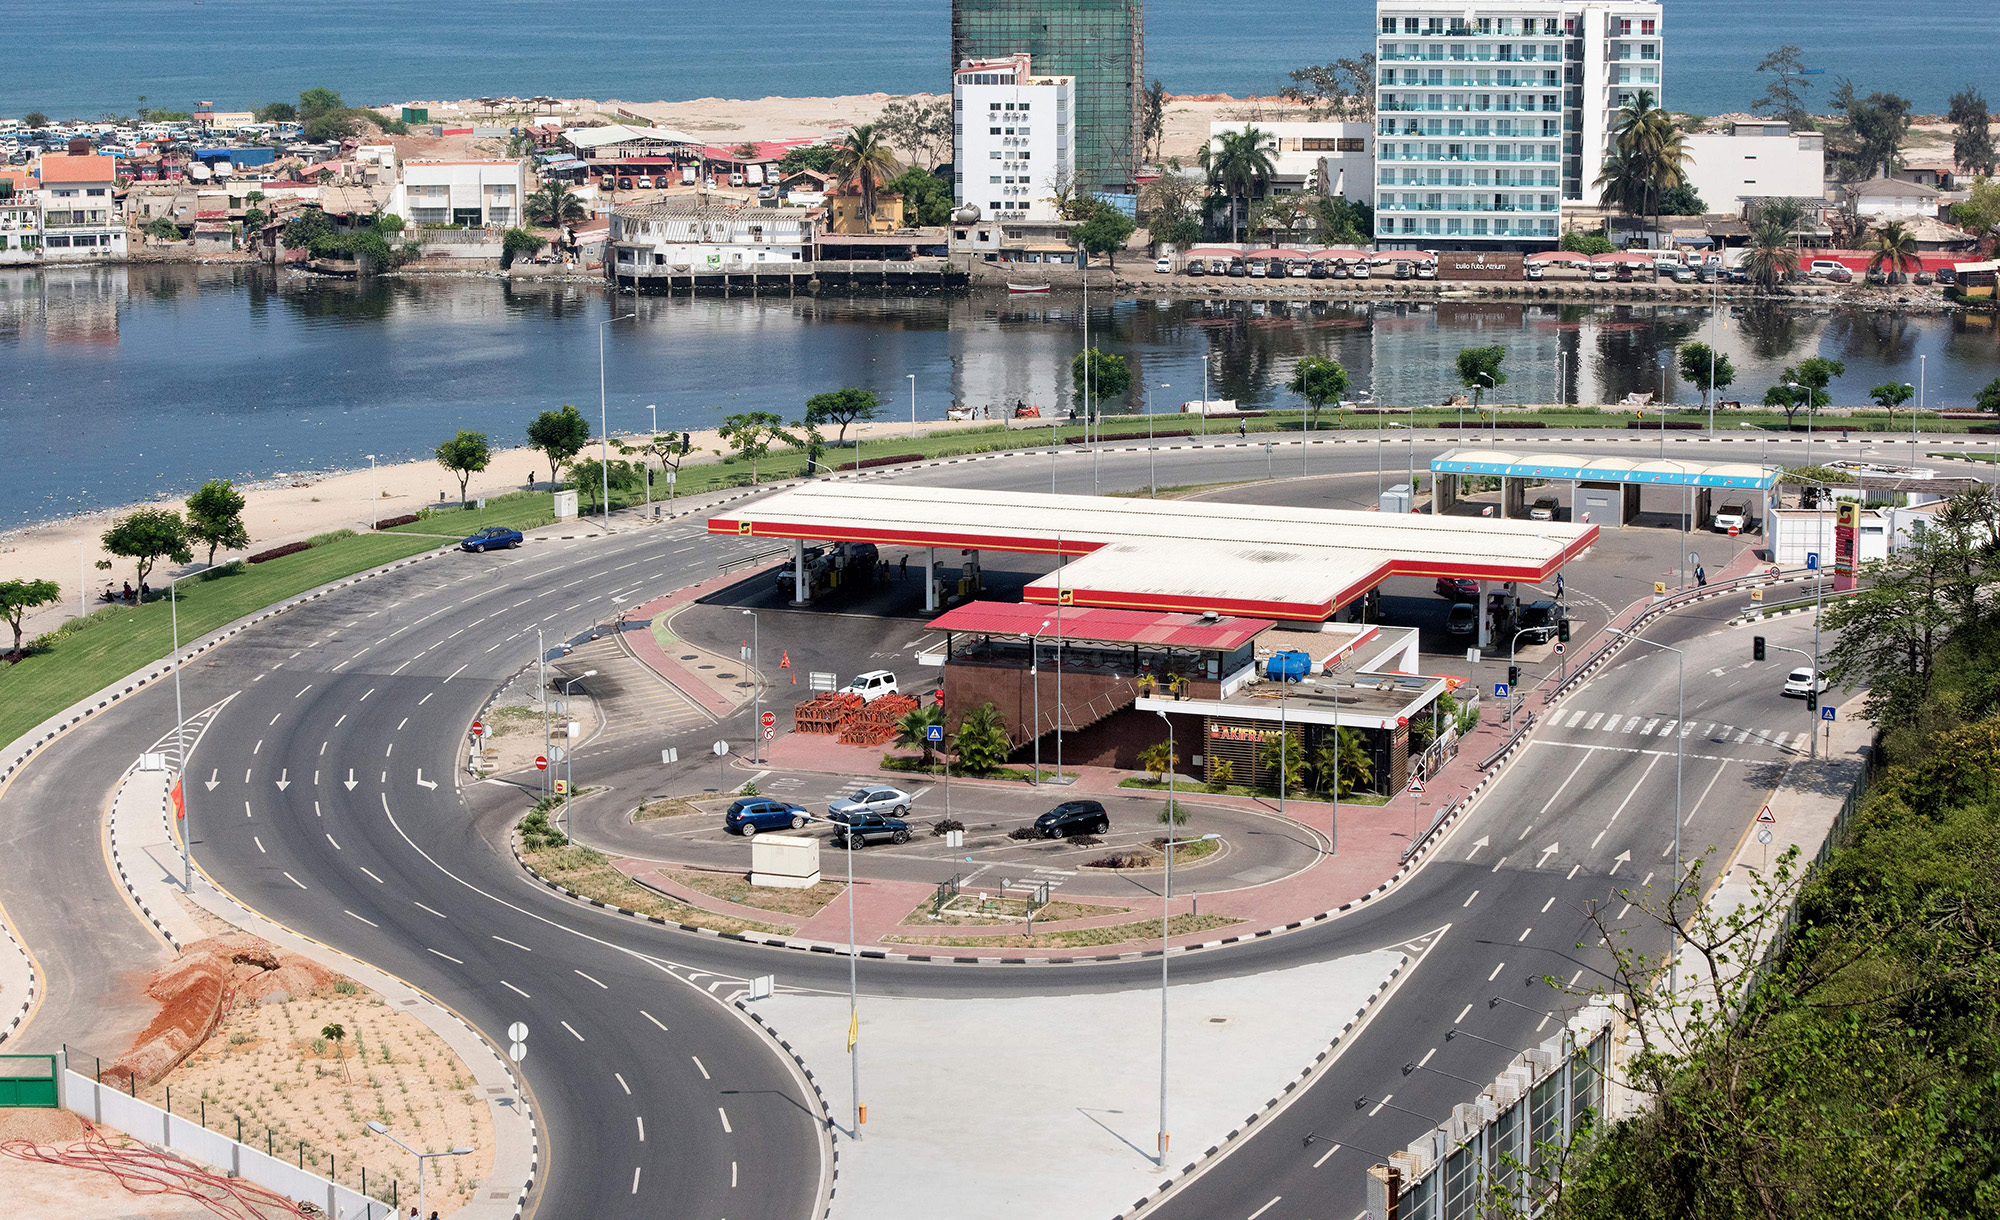 A Sonangol (Angolan national petrol and oil company) petrol station in the city of Luanda in the capital of Angola.